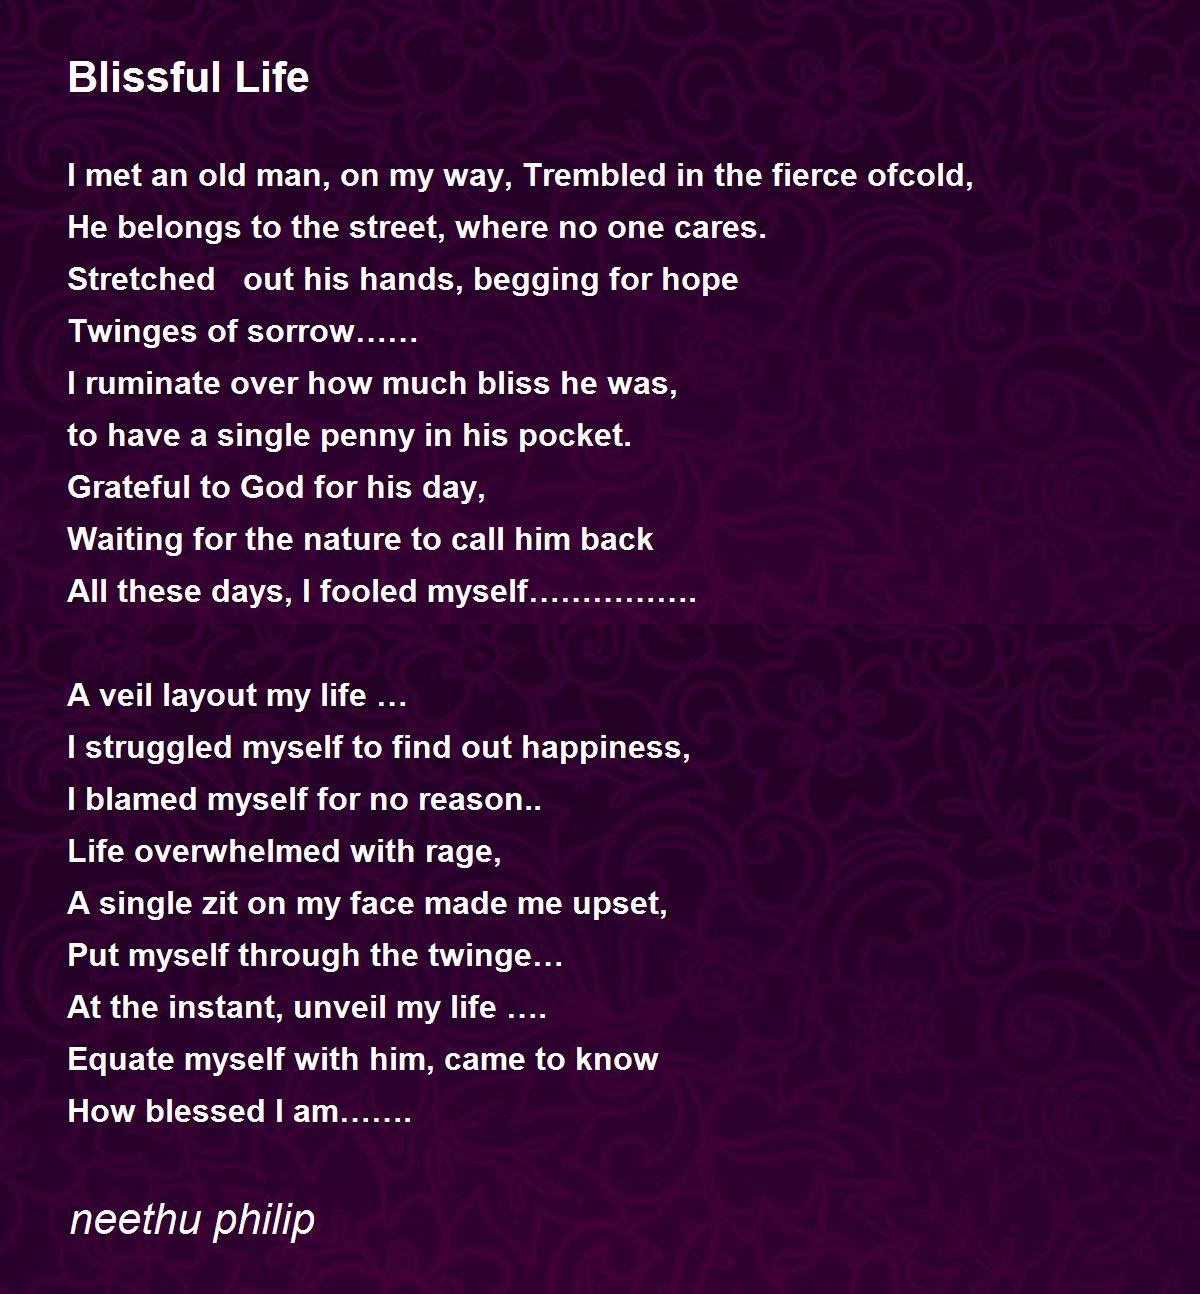 Blissful Life - Blissful Life Poem by neethu philip